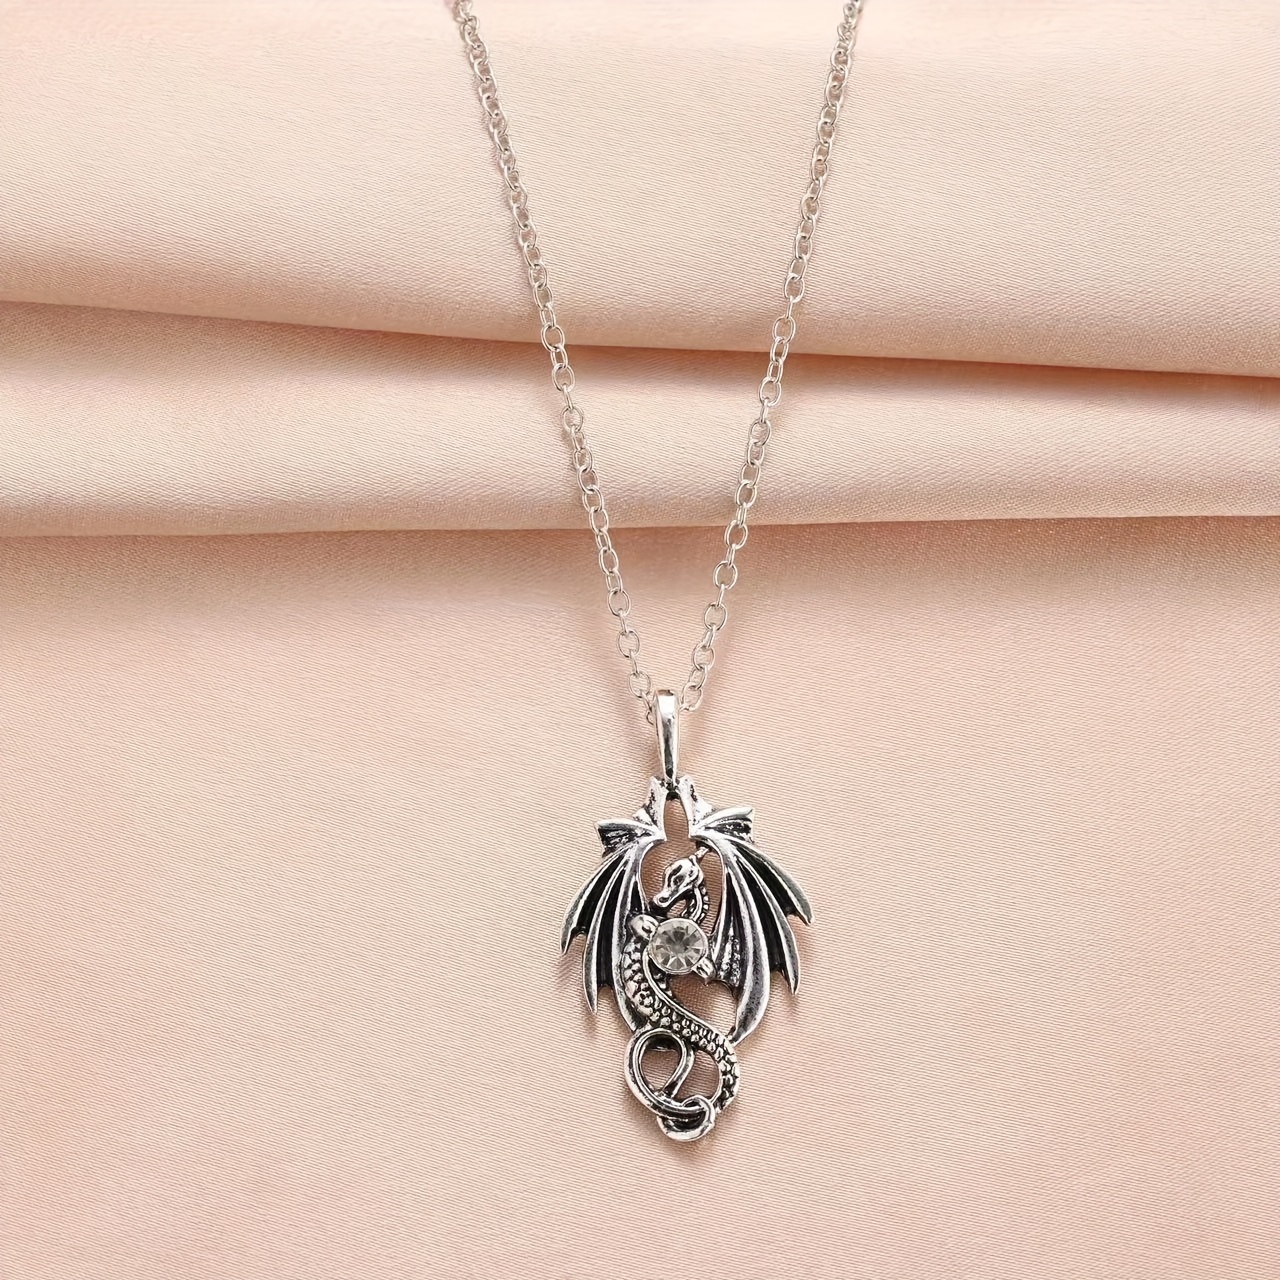 1pc cool engraved 3d dragon shaped pendant necklace rhinestone eternity love symbol clavicle chain for teens